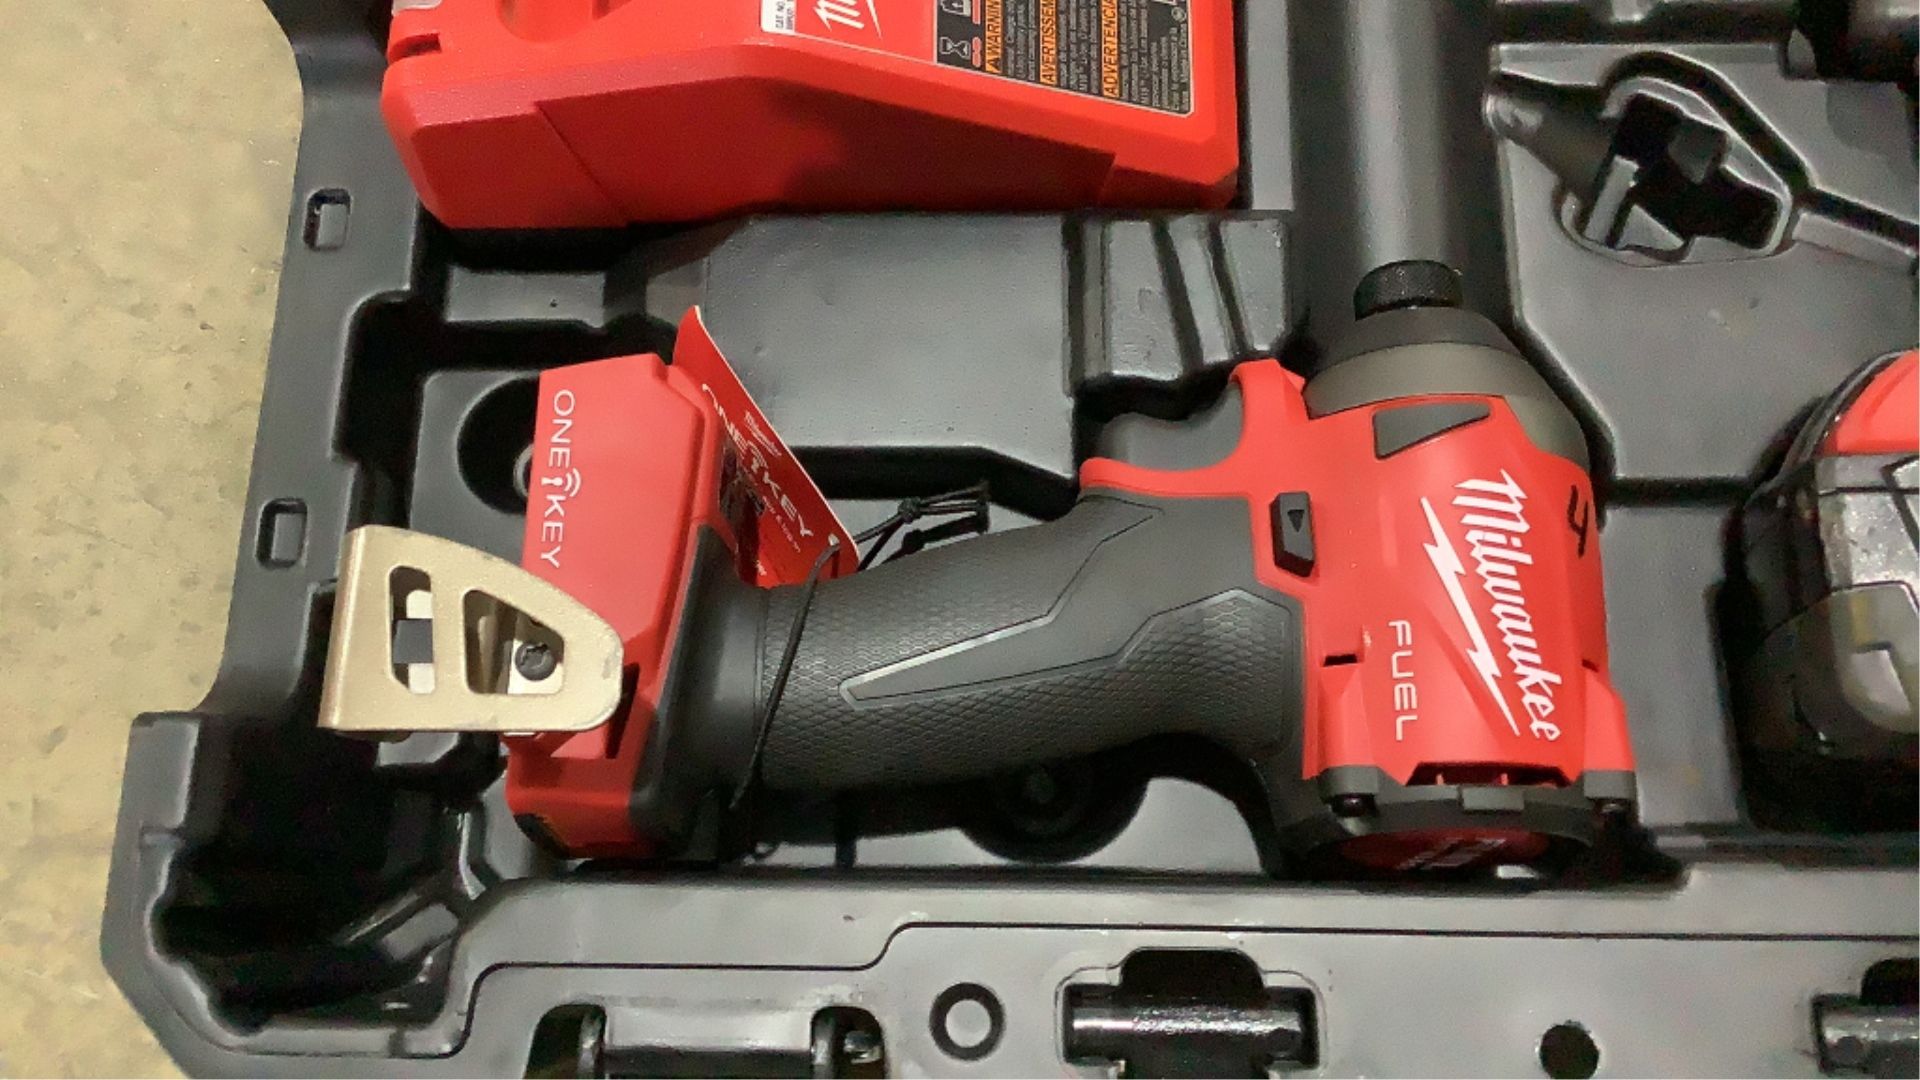 Milwaukee 1/4" Impact Driver and 1/2" Drill/Driver - Image 7 of 12